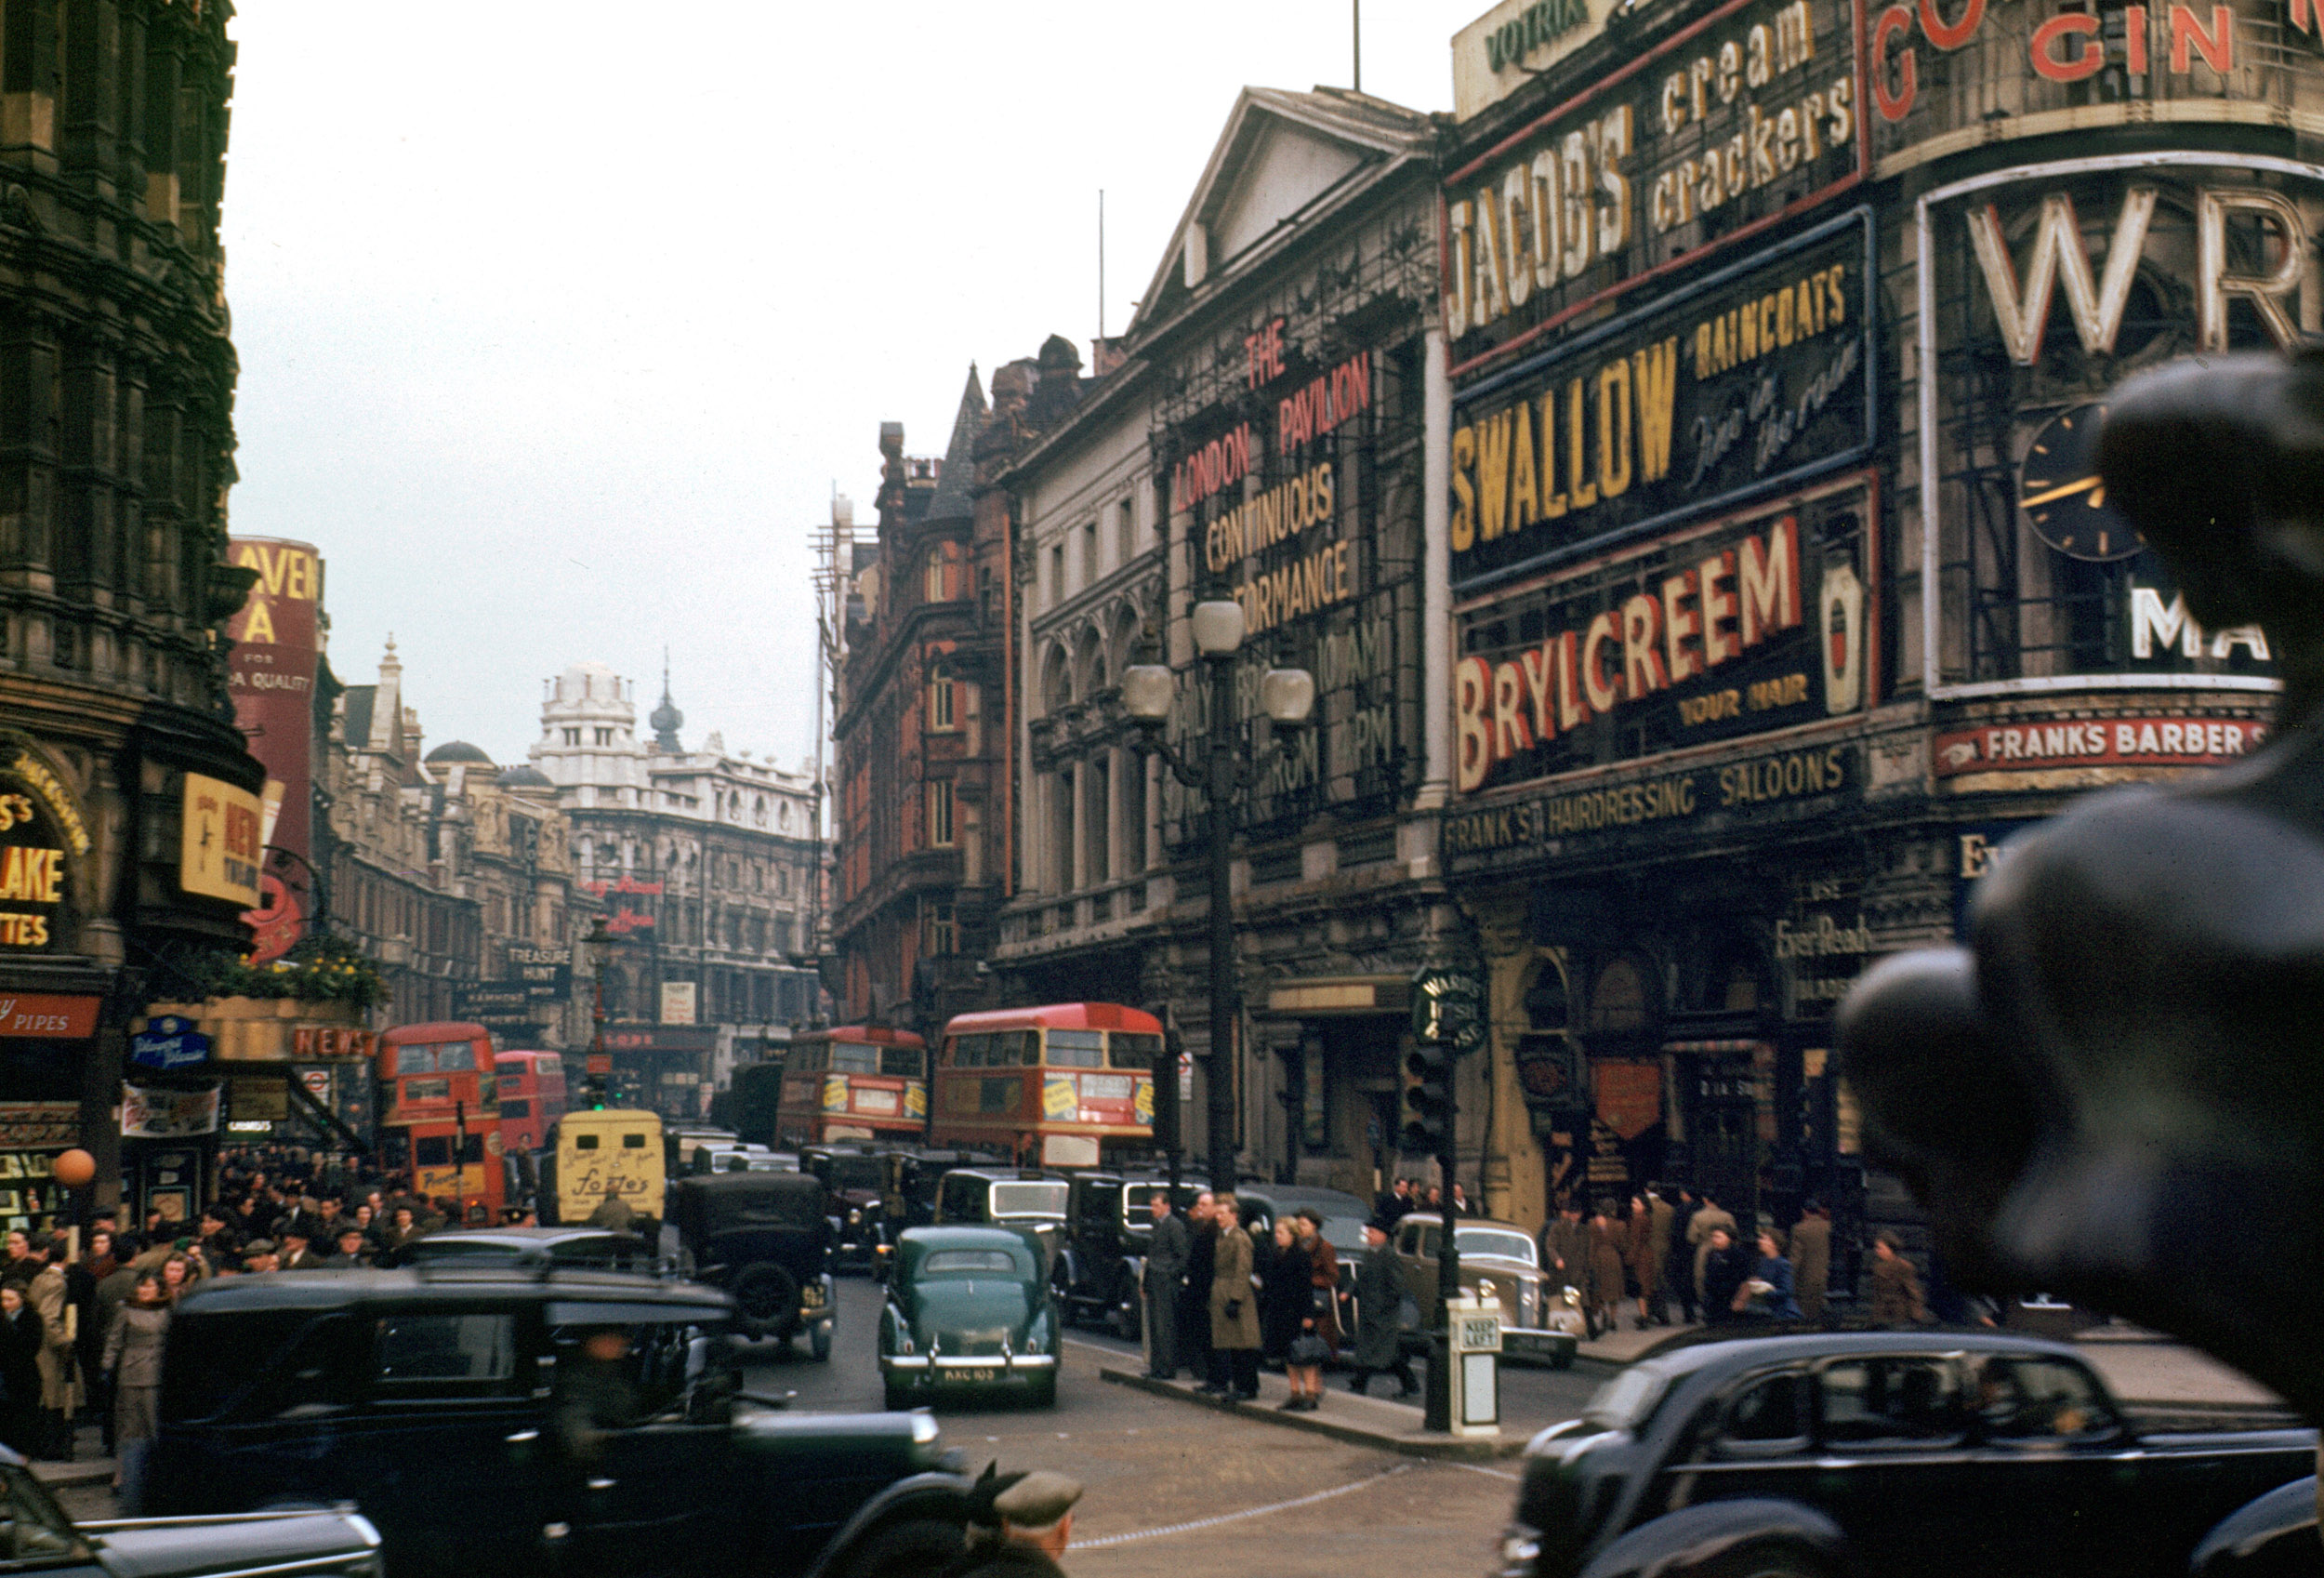 London, colored, old photography - desktop wallpaper